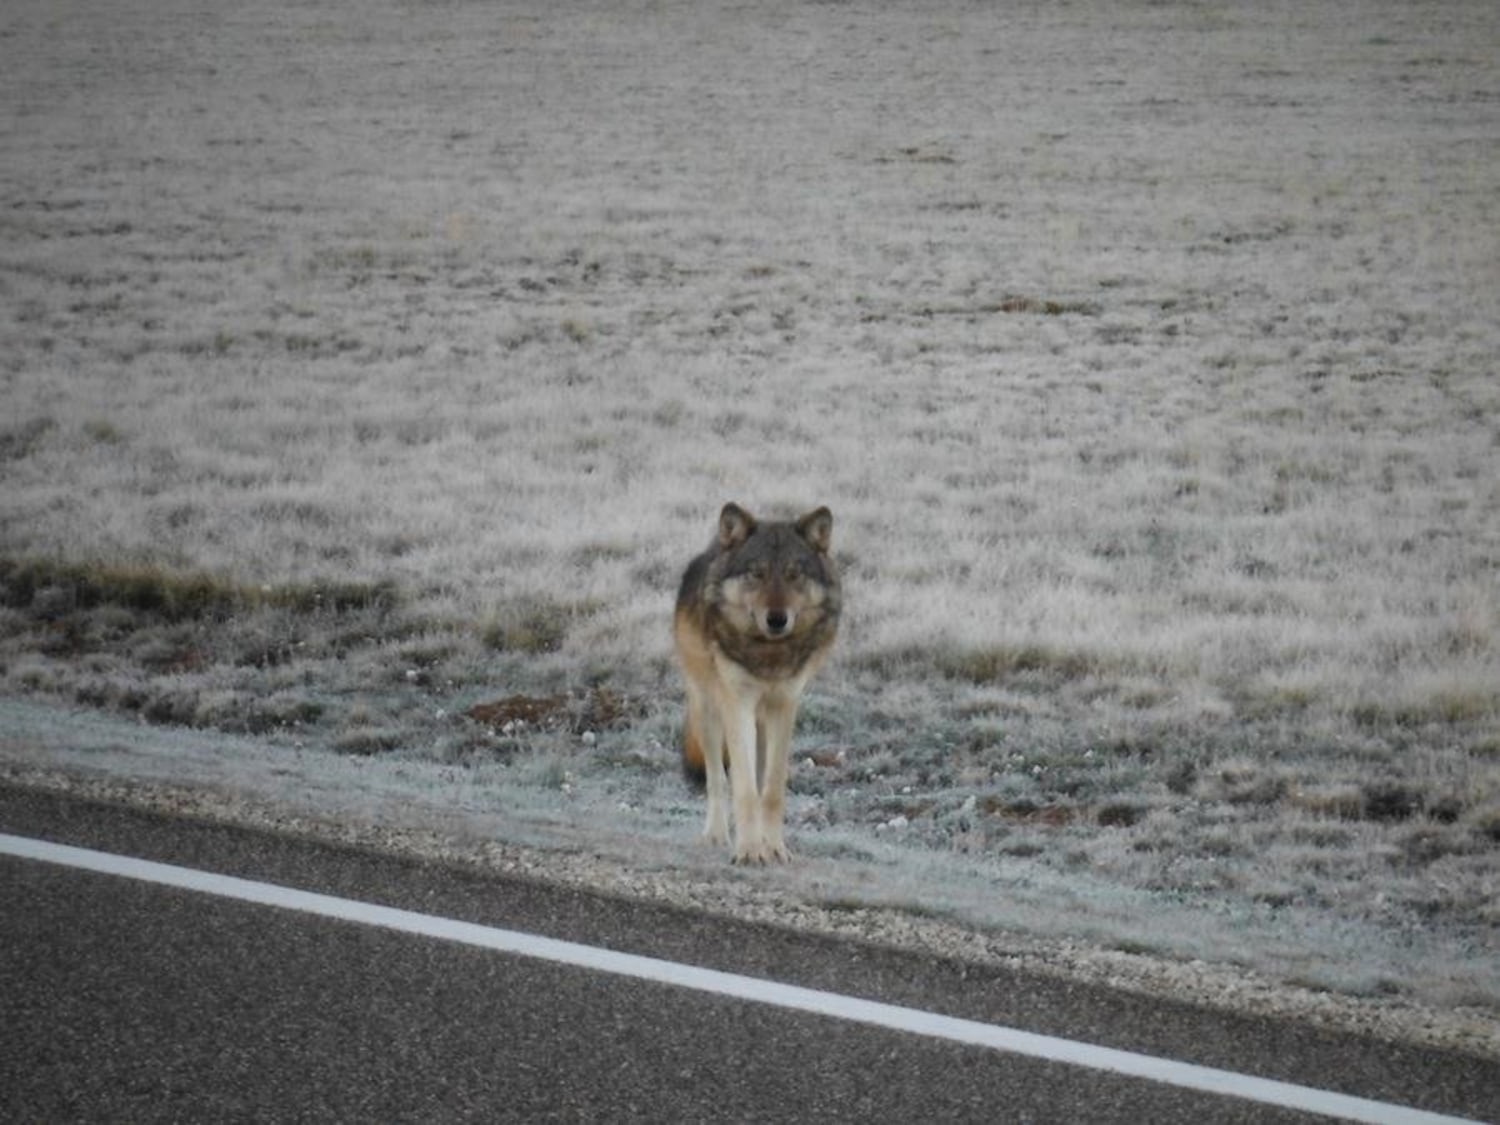 White Mountains are home to Mexican gray wolves and coyotes, 260  Connection